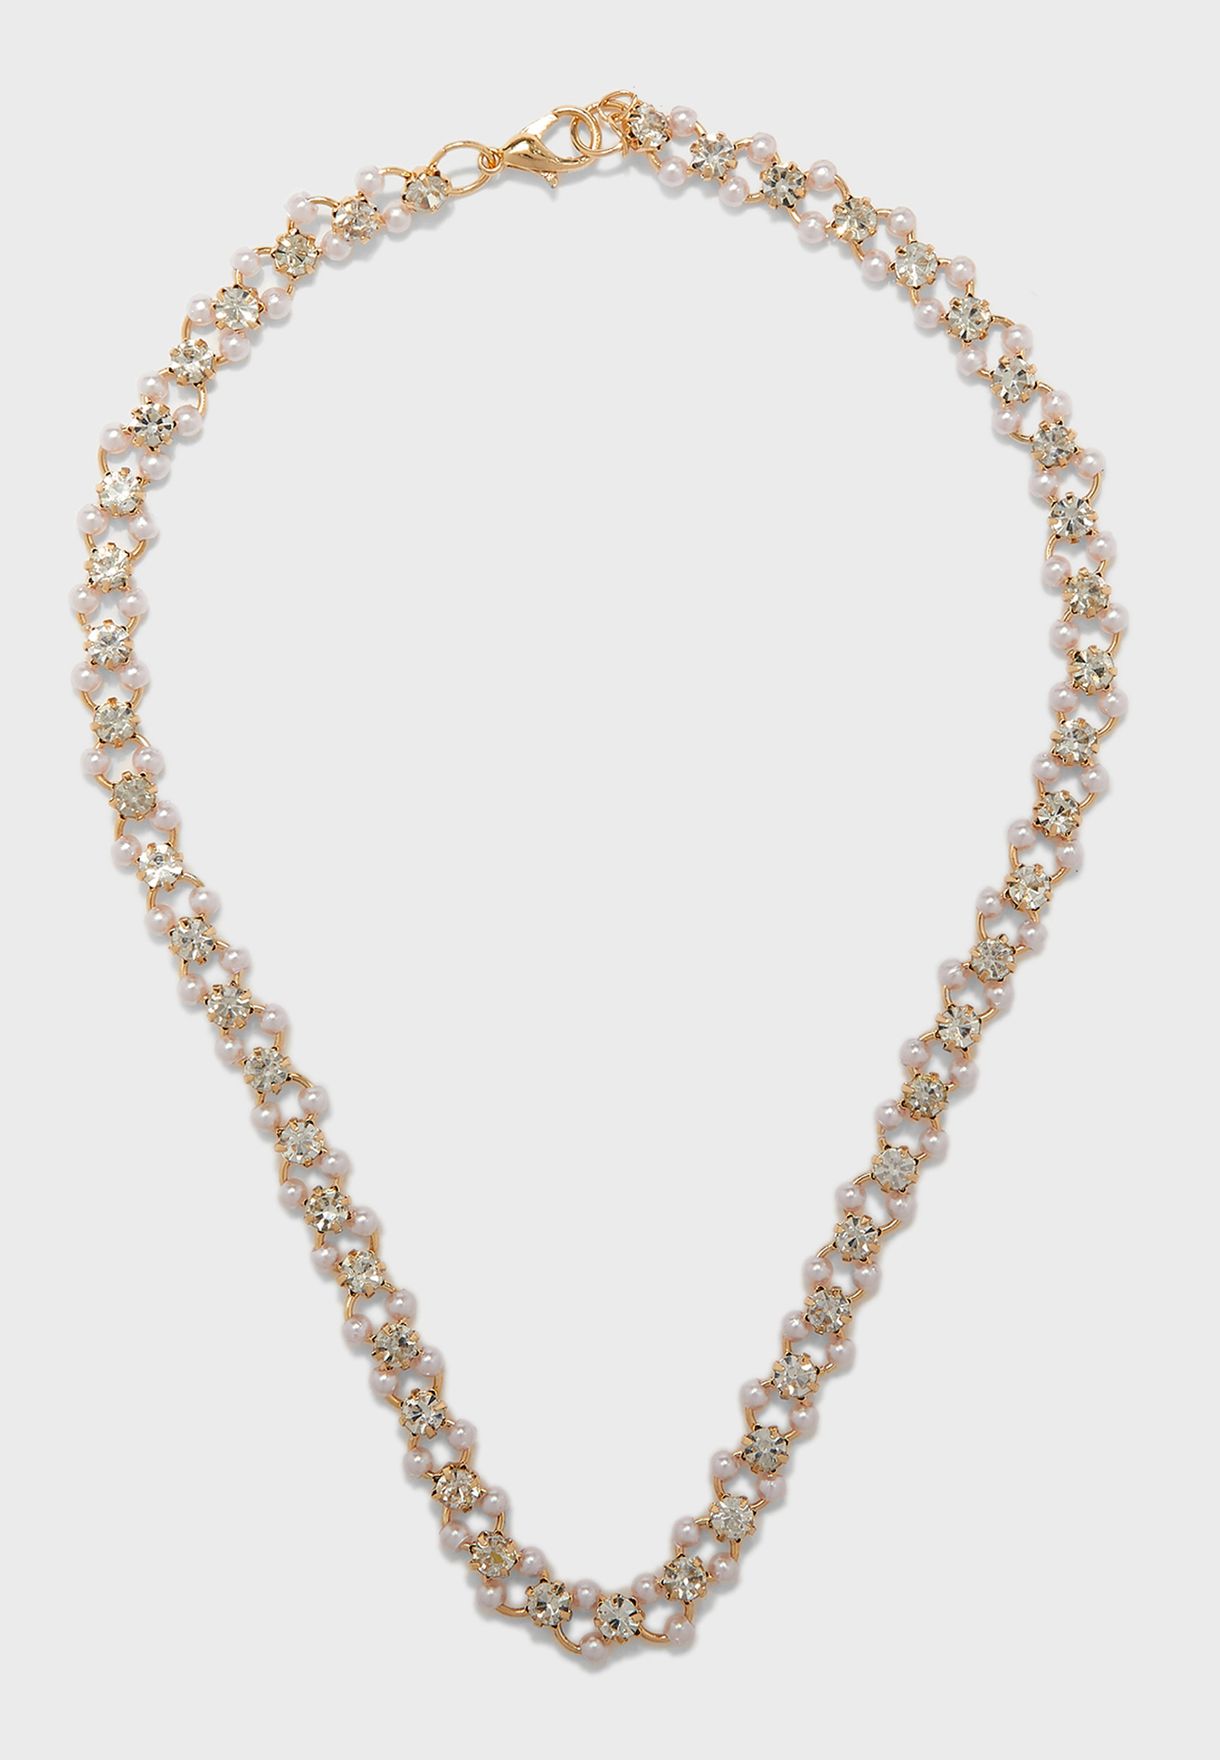 4 Layer Pearl And Chain Necklace With Stone Pendent 